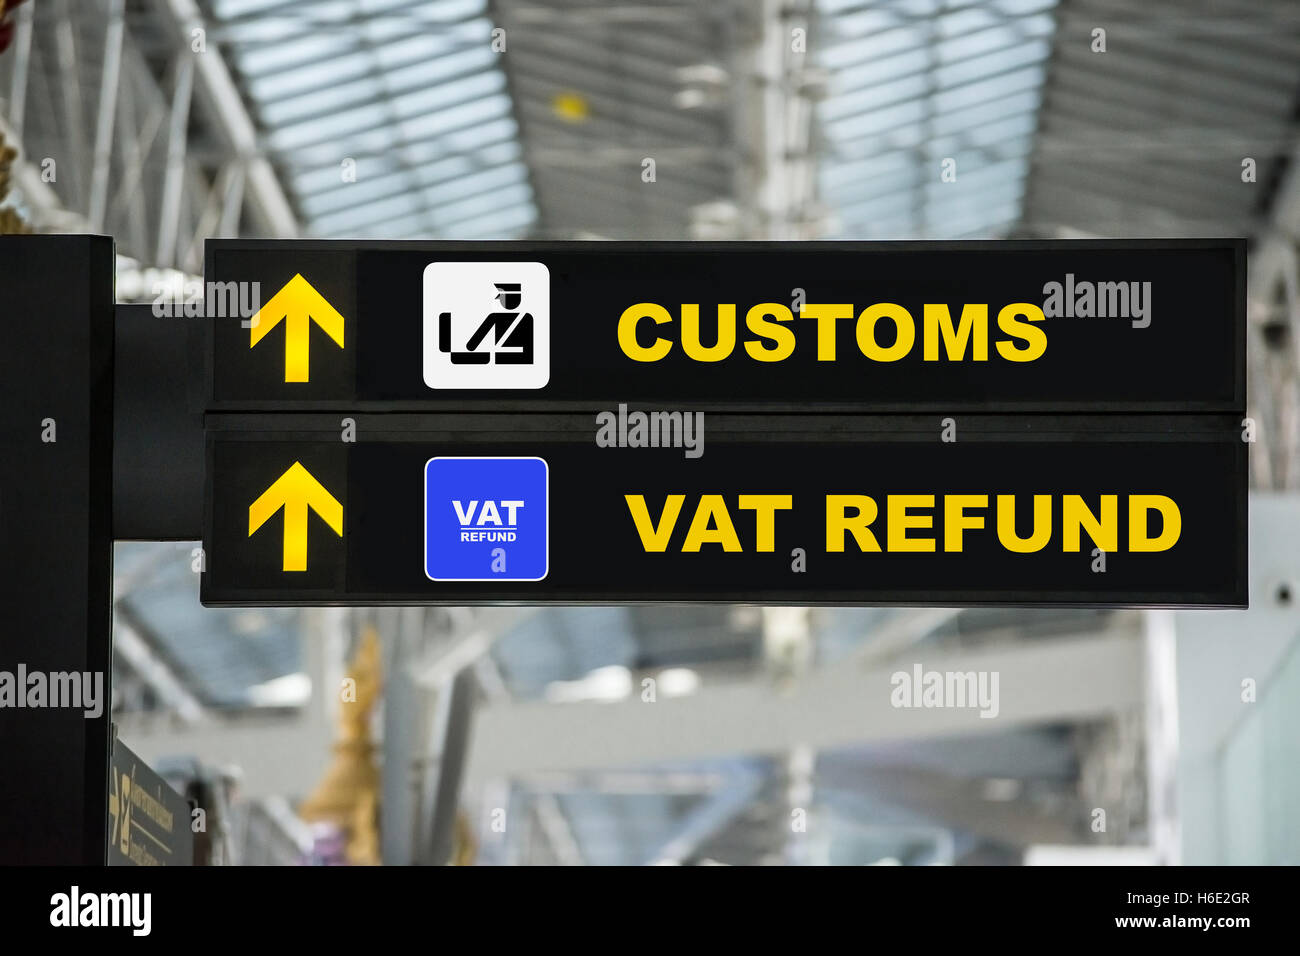 airport-tax-refund-and-customs-sign-in-terminal-at-airport-stock-photo